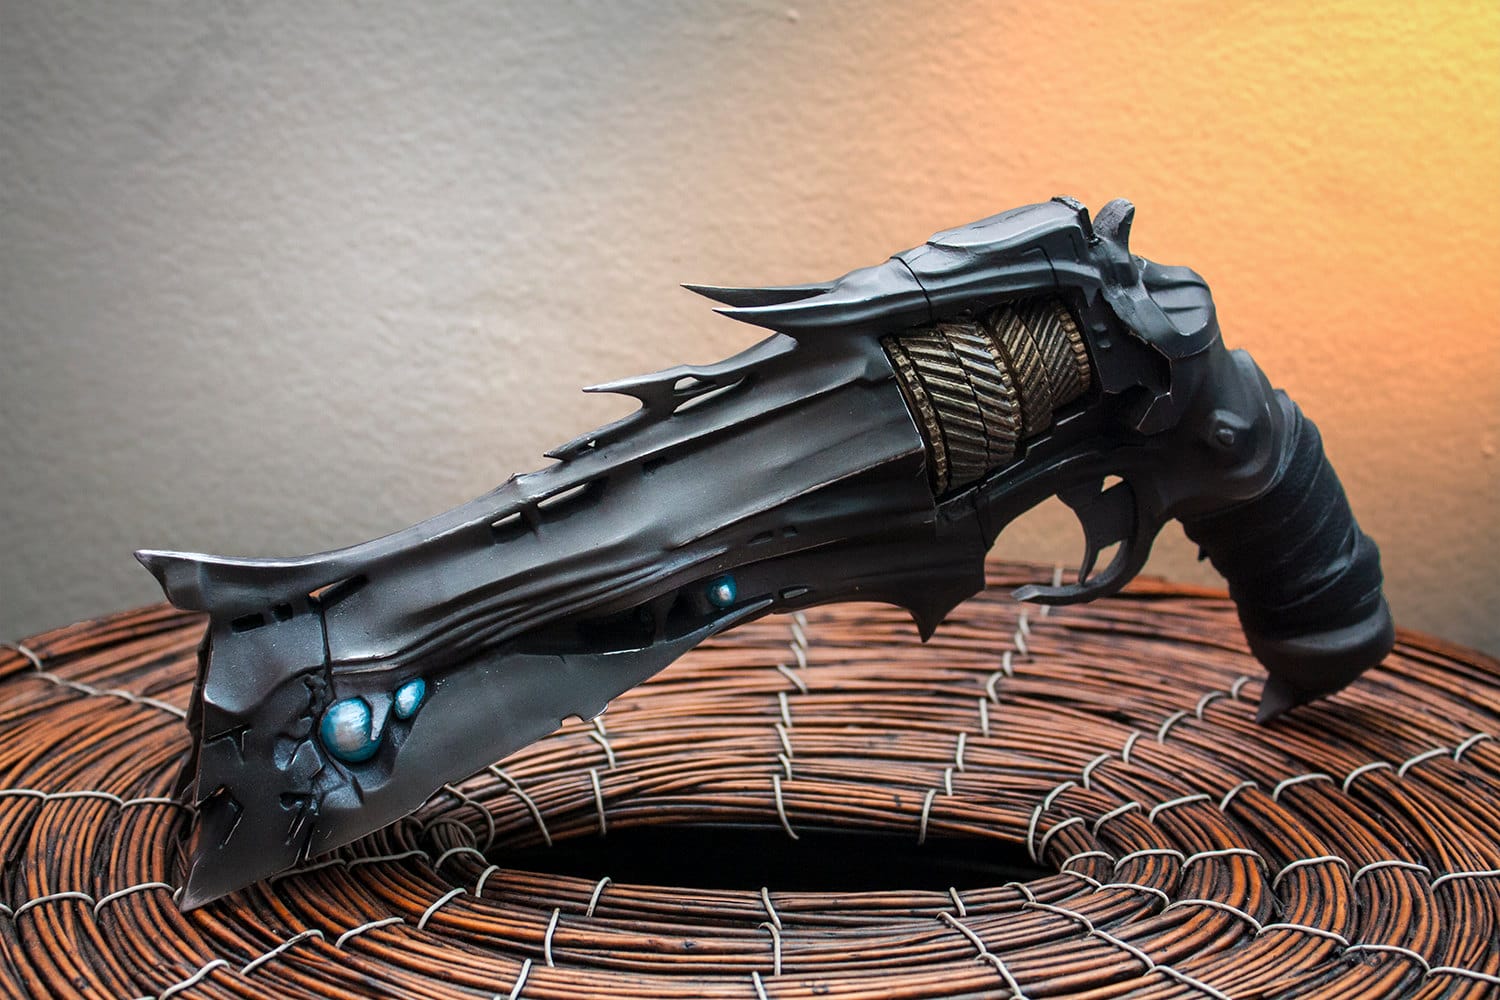 Looking for your very own Thorn Hand Cannon from Destiny?